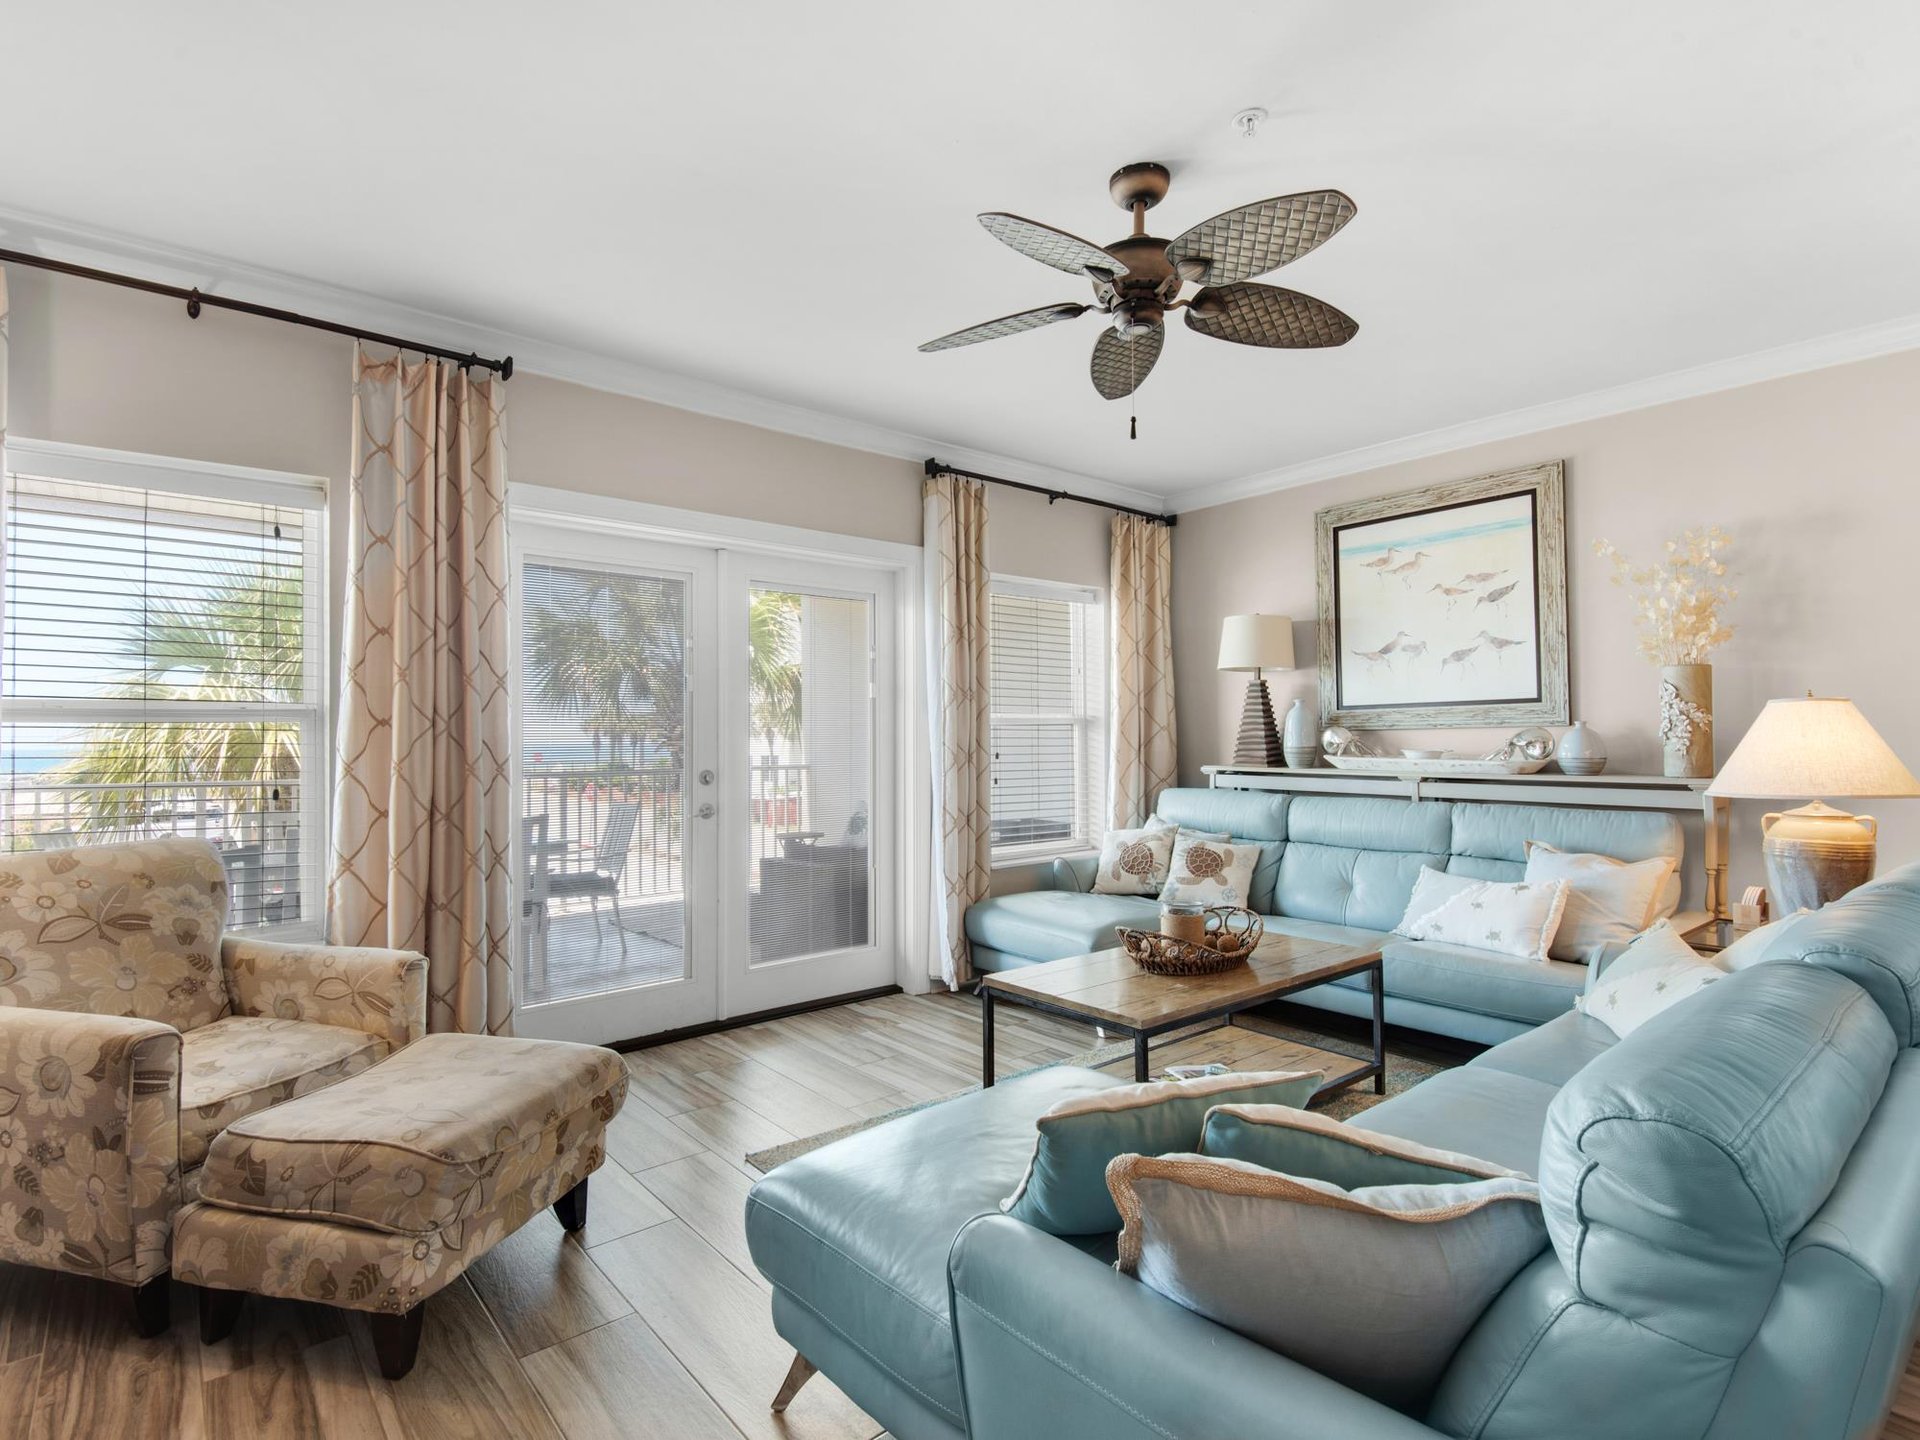 Welcome to Pavilion Palms 104C a great Destin vacation rental